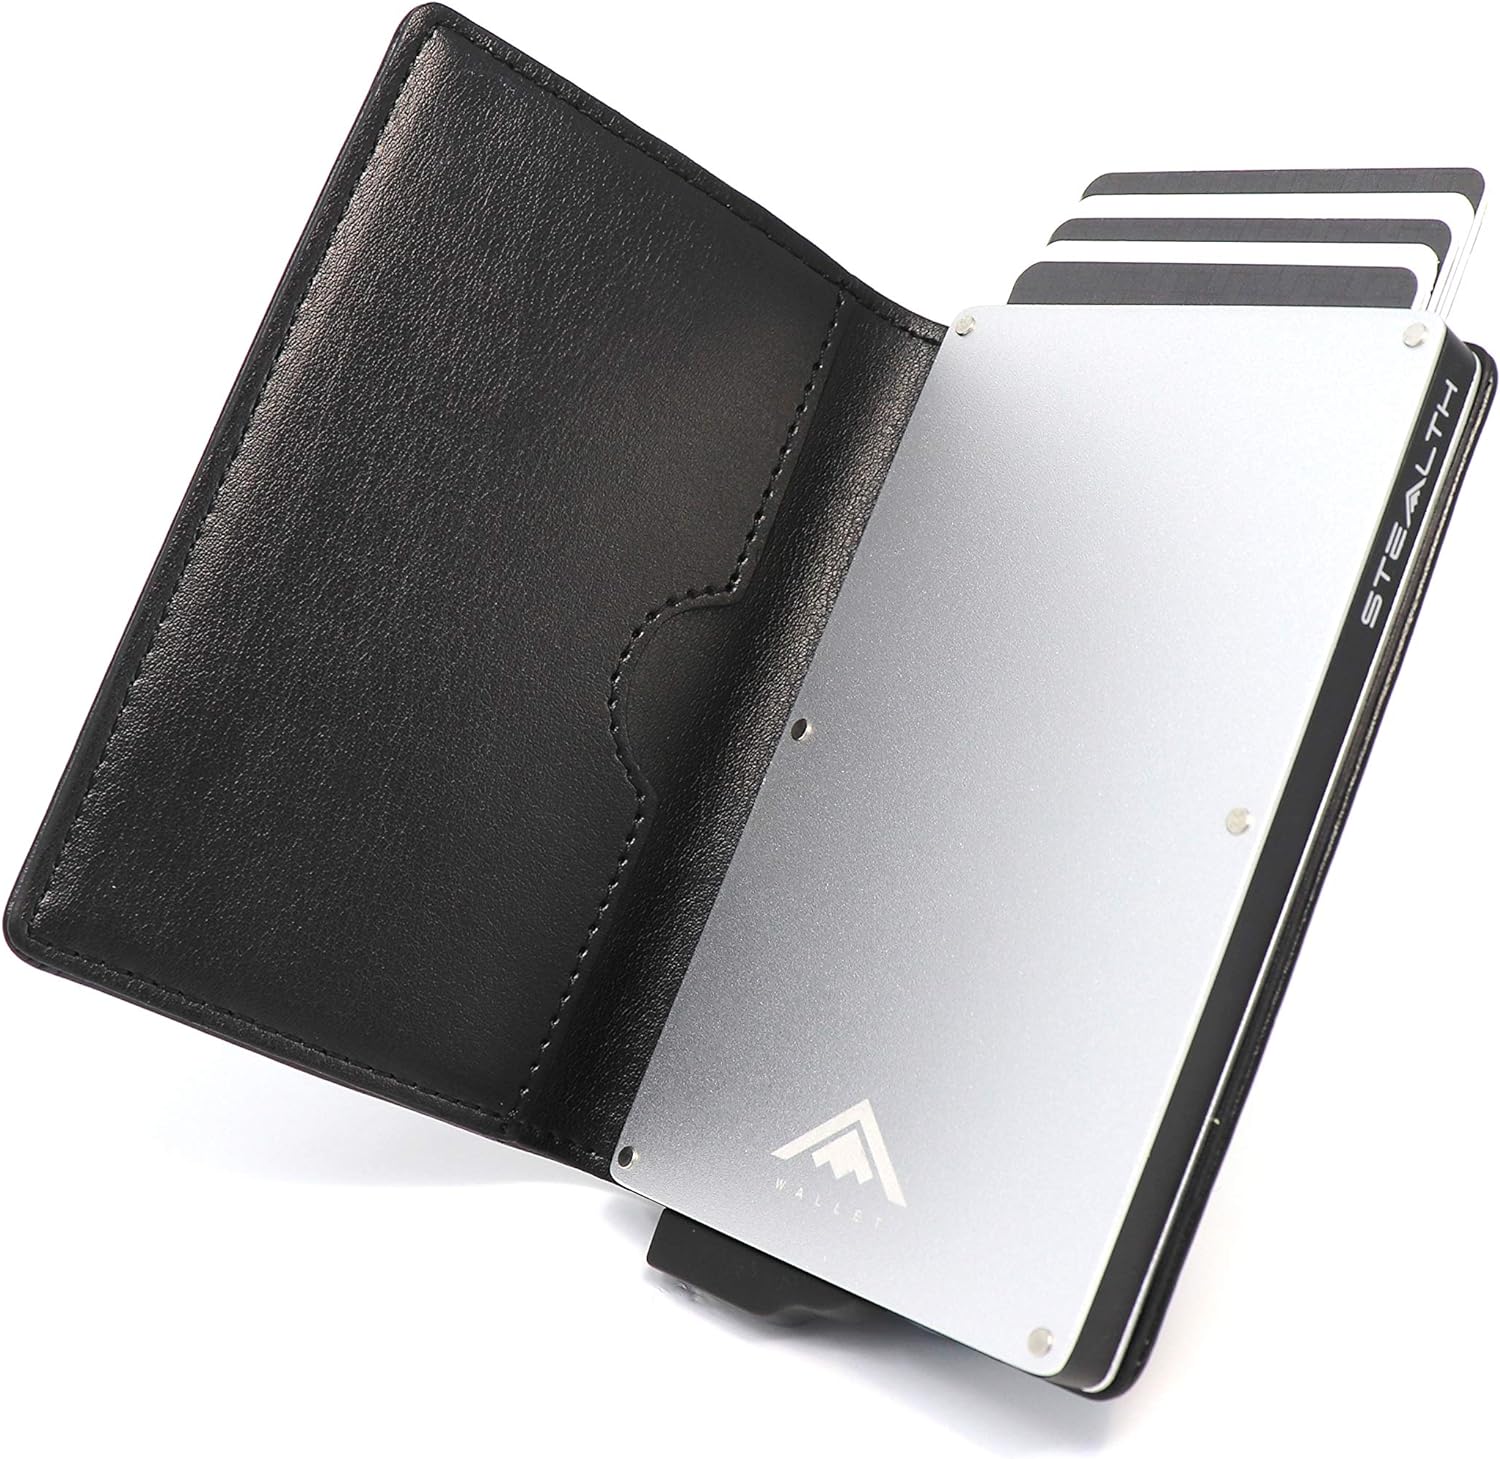 Stealth Wallet RFID Card Holders - Smart Minimalist NFC Blocking Pop Up Wallets with Gift Box - Slim Lightweight Metal Credit Cards Holder & Contactless Protector (Silver Aluminum with Black Leather)